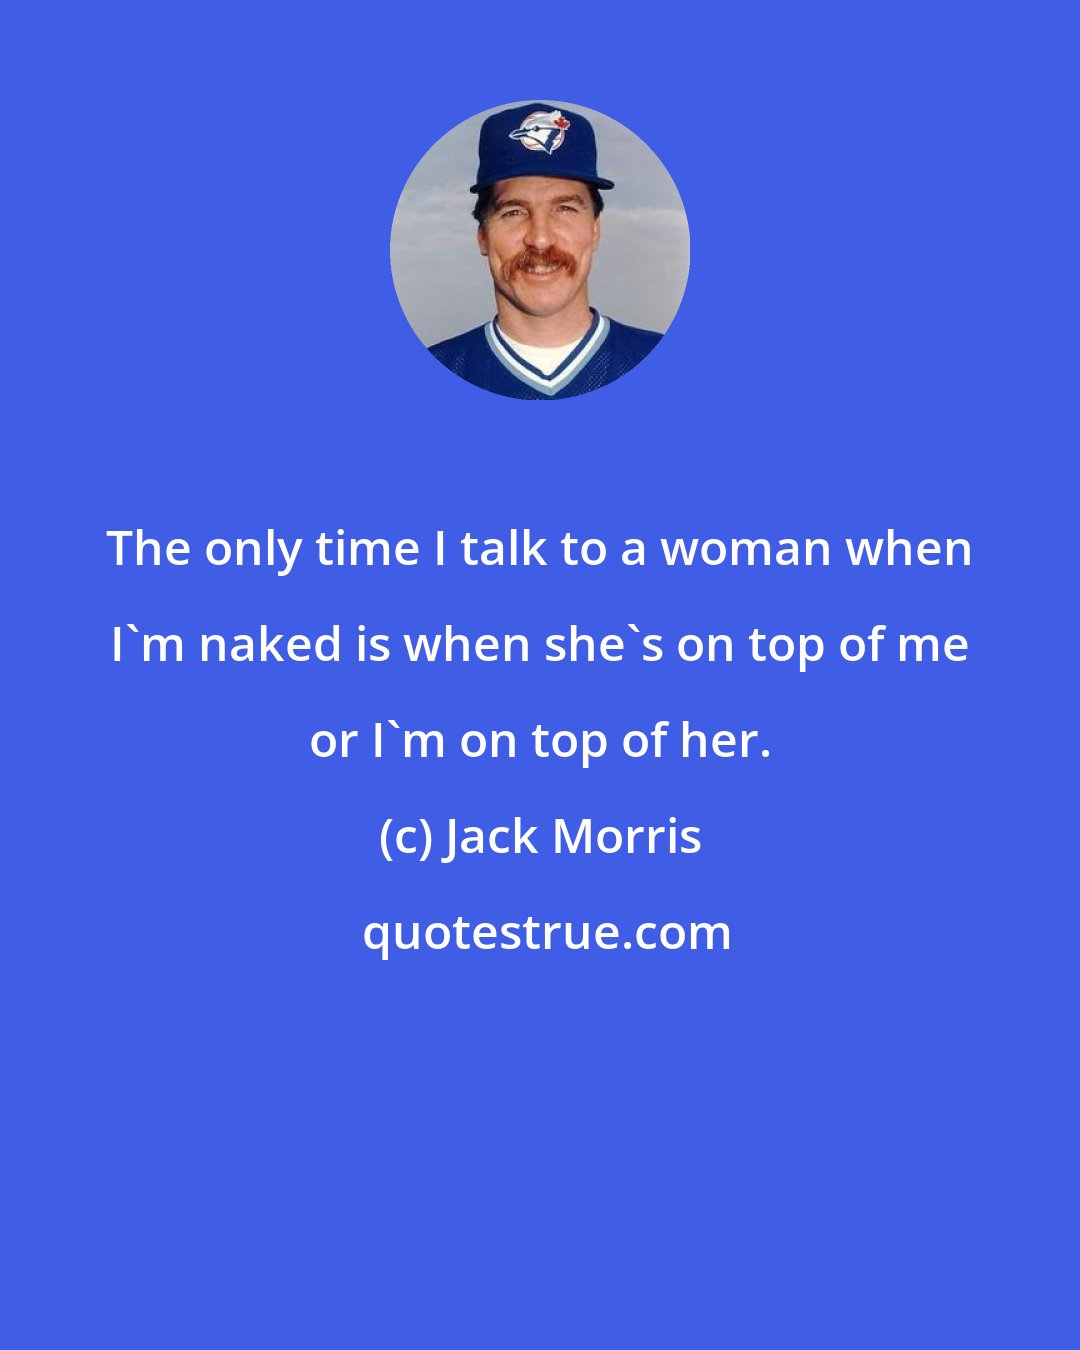 Jack Morris: The only time I talk to a woman when I'm naked is when she's on top of me or I'm on top of her.